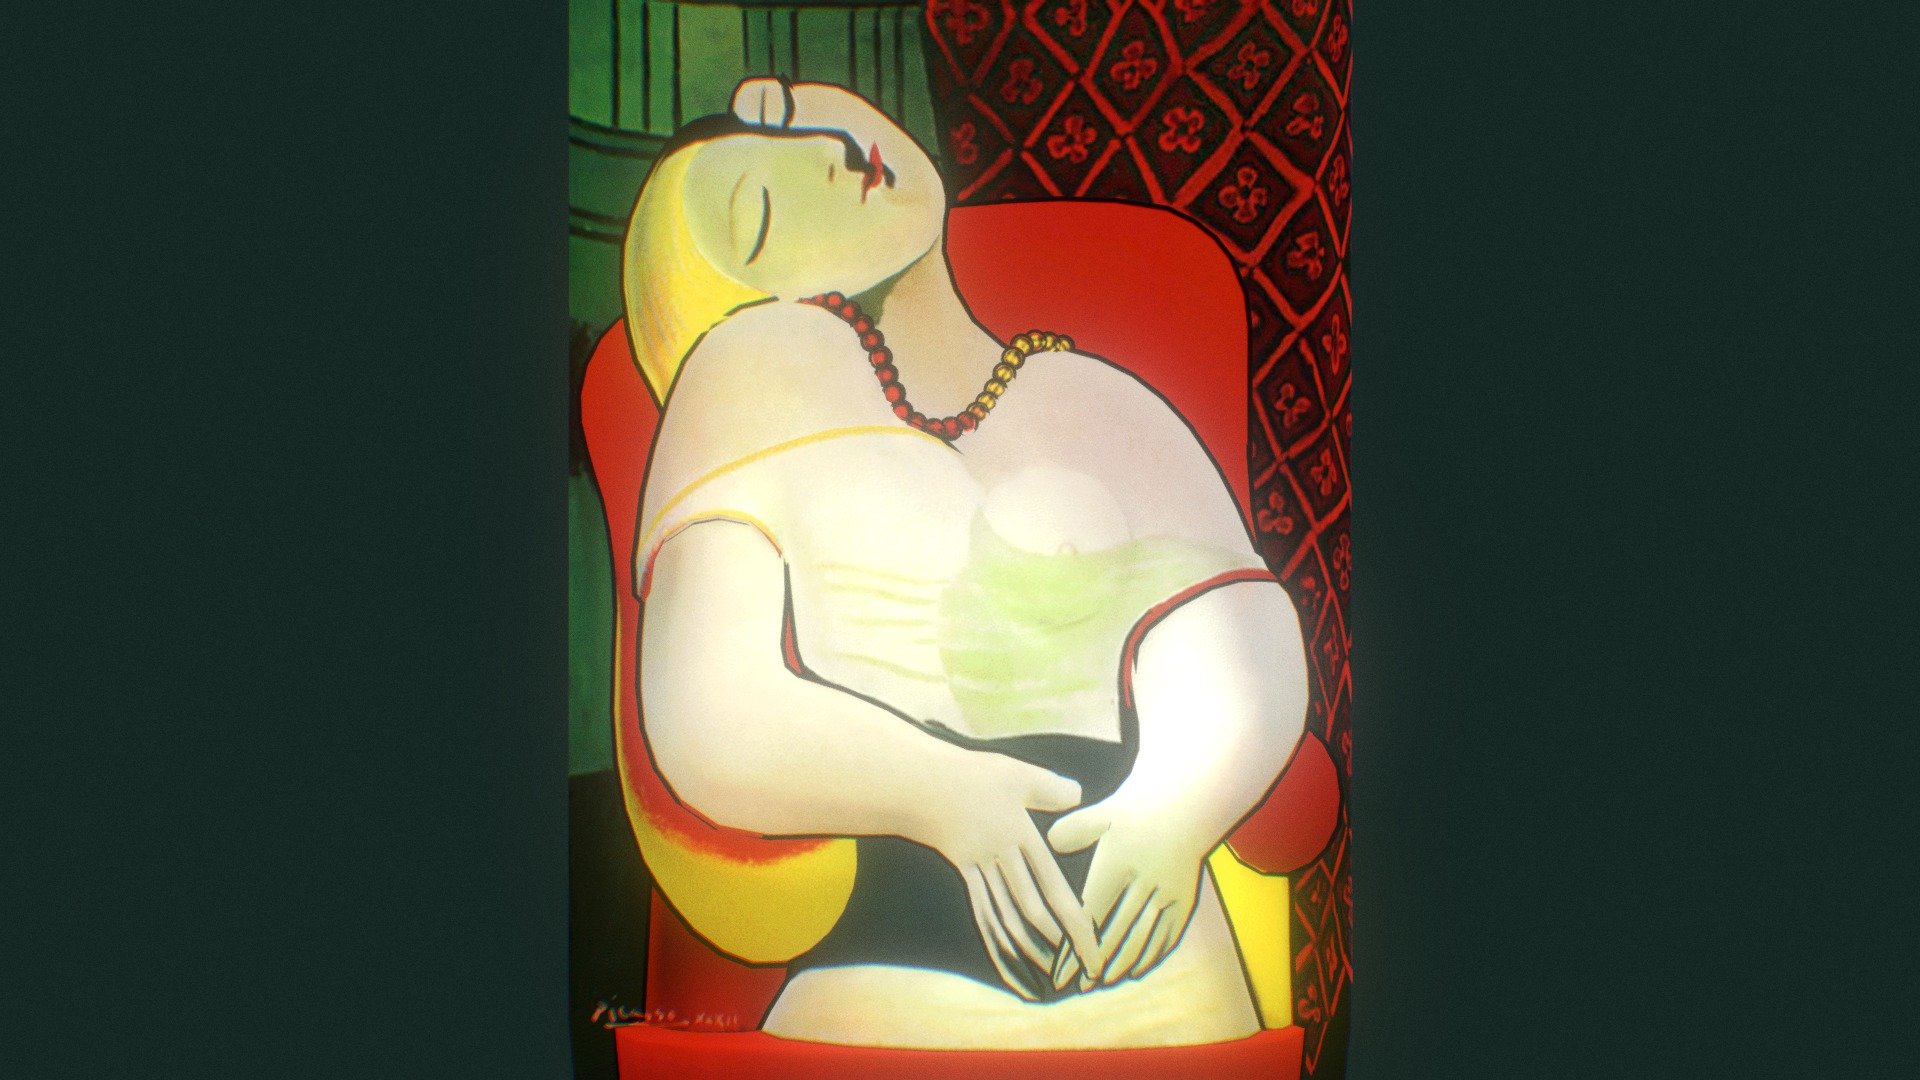 (2016) Le Rêve 3D
This is a tribute to the famous Spanish Cubism artist Pablo Picasso (1881-1973) and his Fauvism painting Le Rêve (the Dream, 1932), portraying his then 22-year-old mistress Marie-Thérèse Walter (1909-1977).
Realized the organic feminine form in 3D out of abstract 2D shapes, I attempted to add life with a subtle breathing animation, and let her dreams a starry night, away from erotic / phallic fantasies.
(Source information and image linked from Wikipedia. The original painting is a private collection of Steven A. Cohen)
 - Le Rêve 3D - 3D model by hinxlinx 3d model